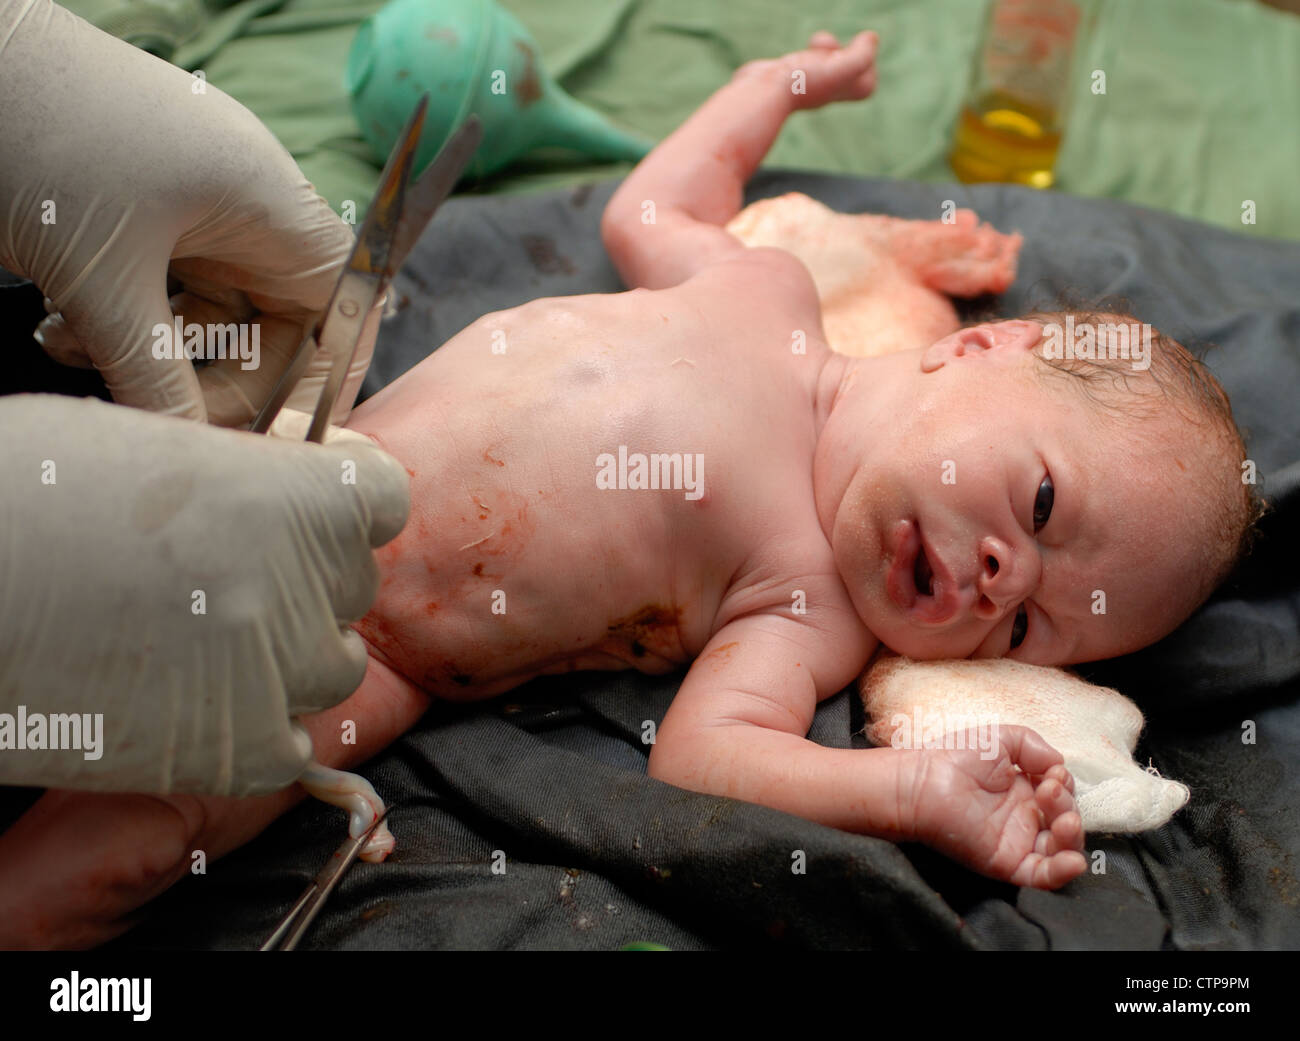 Infant delivered by Caesarean section. Stock Photo